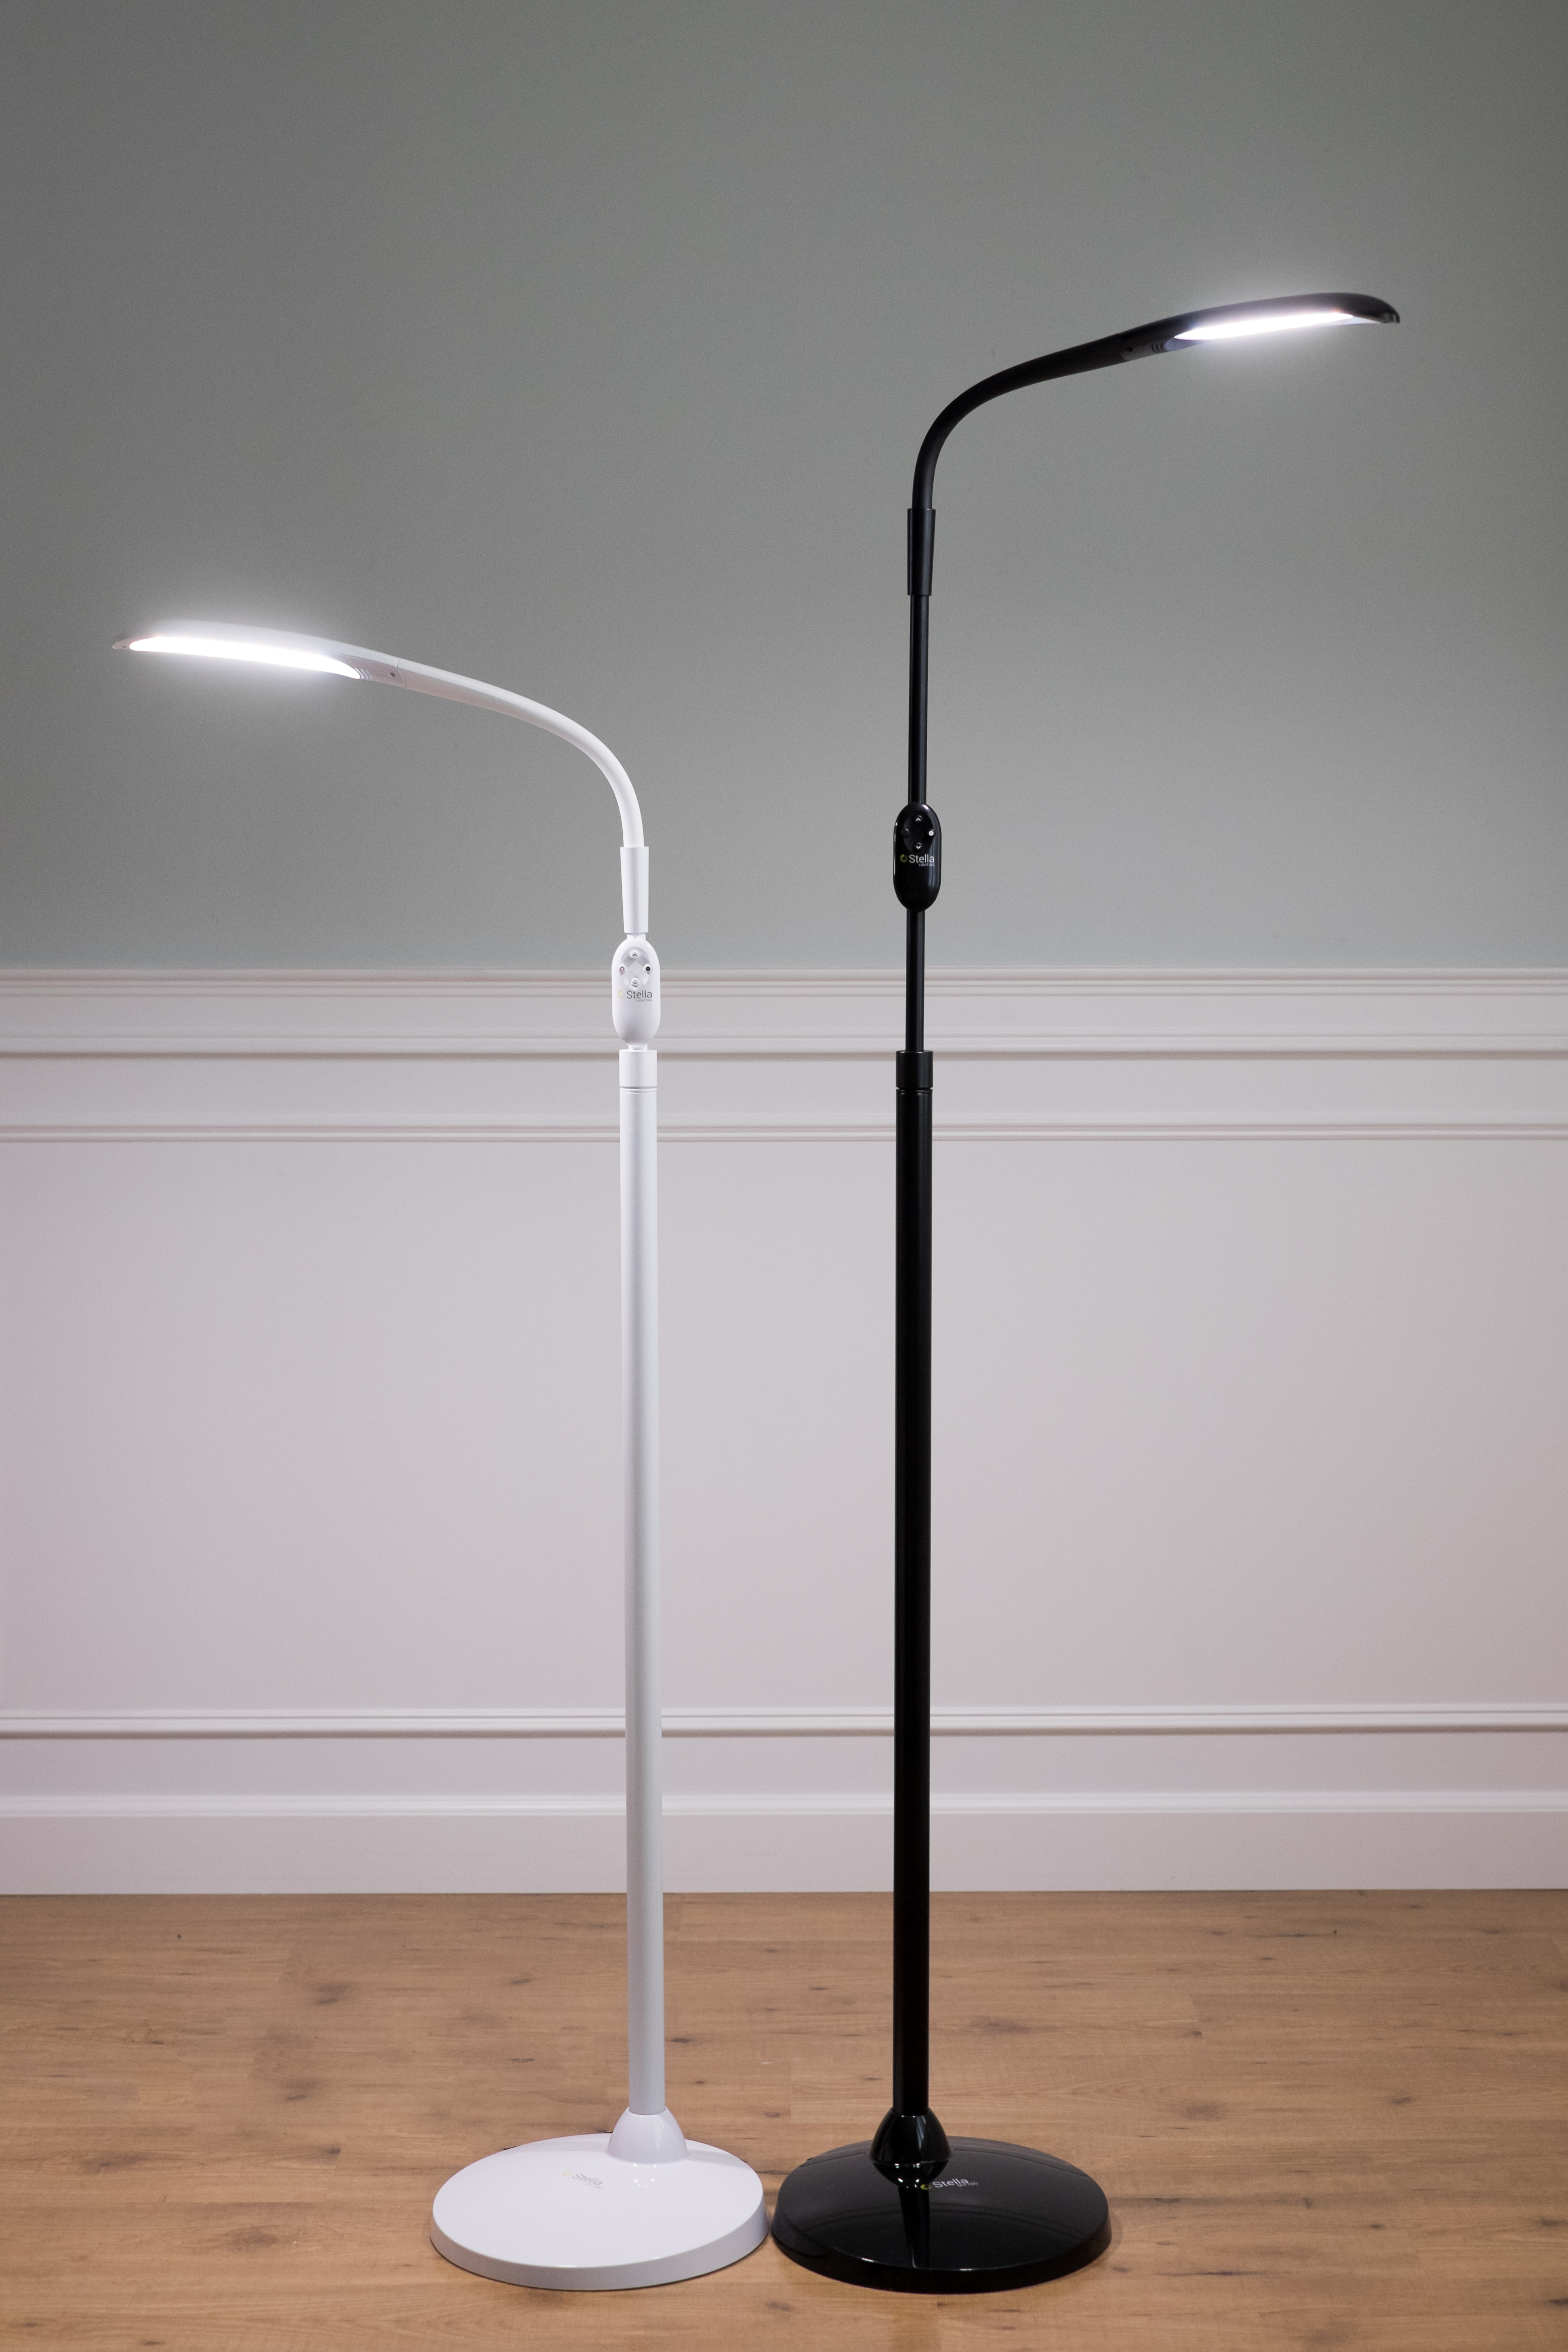 Stella Sky Two Led Floor Lamp Your Low